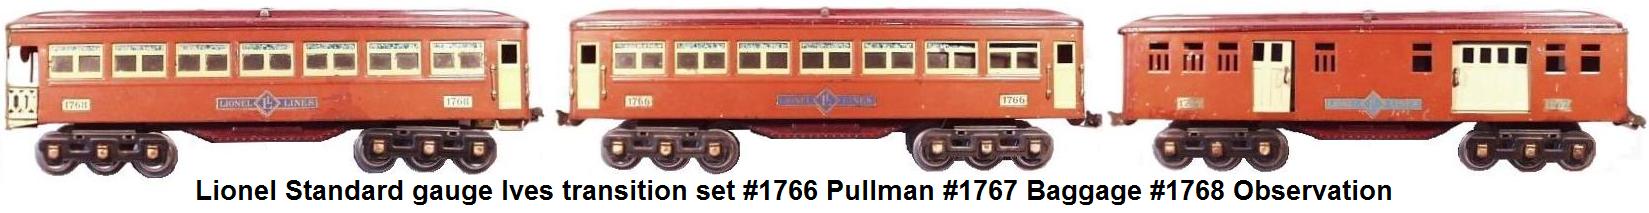 Lionel Standard gauge Ives very rare transition set with 6 wheel trucks on the #1766 Pullman, #1767 Baggage car, and #1768 Observation car